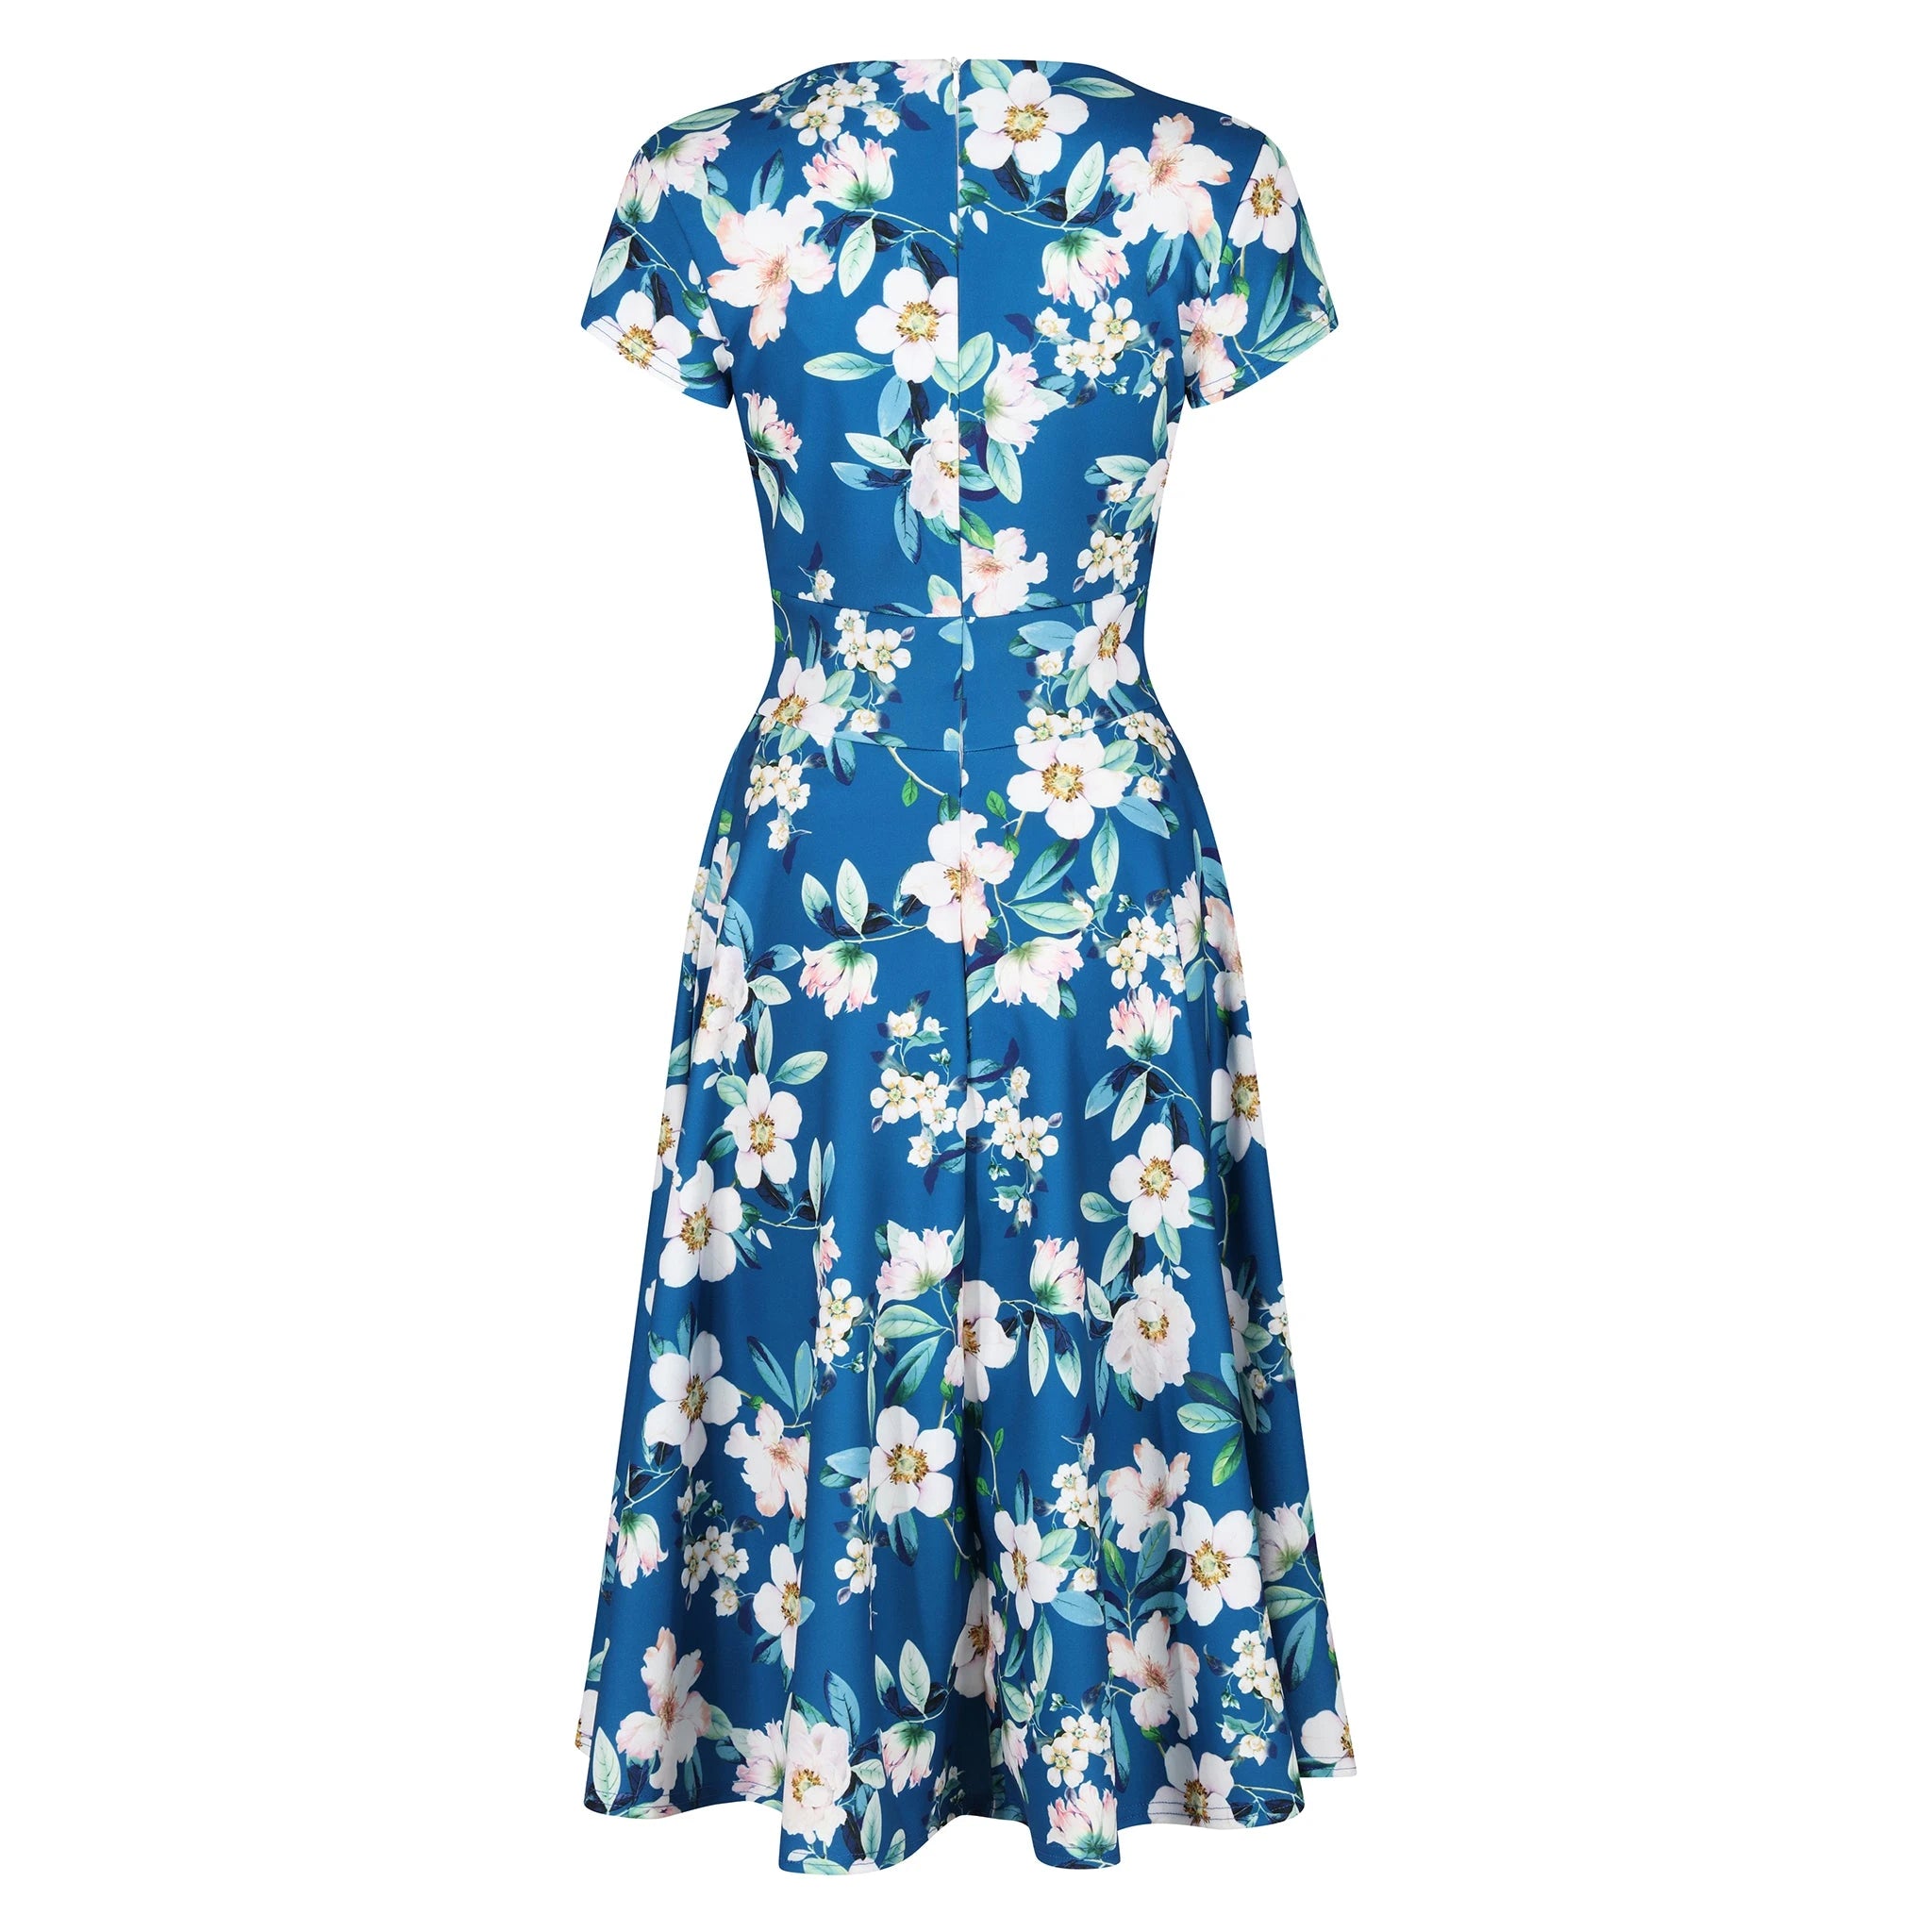 Teal Blue Floral Wrap Top A Line Swing Tea Dress With Cap Sleeves